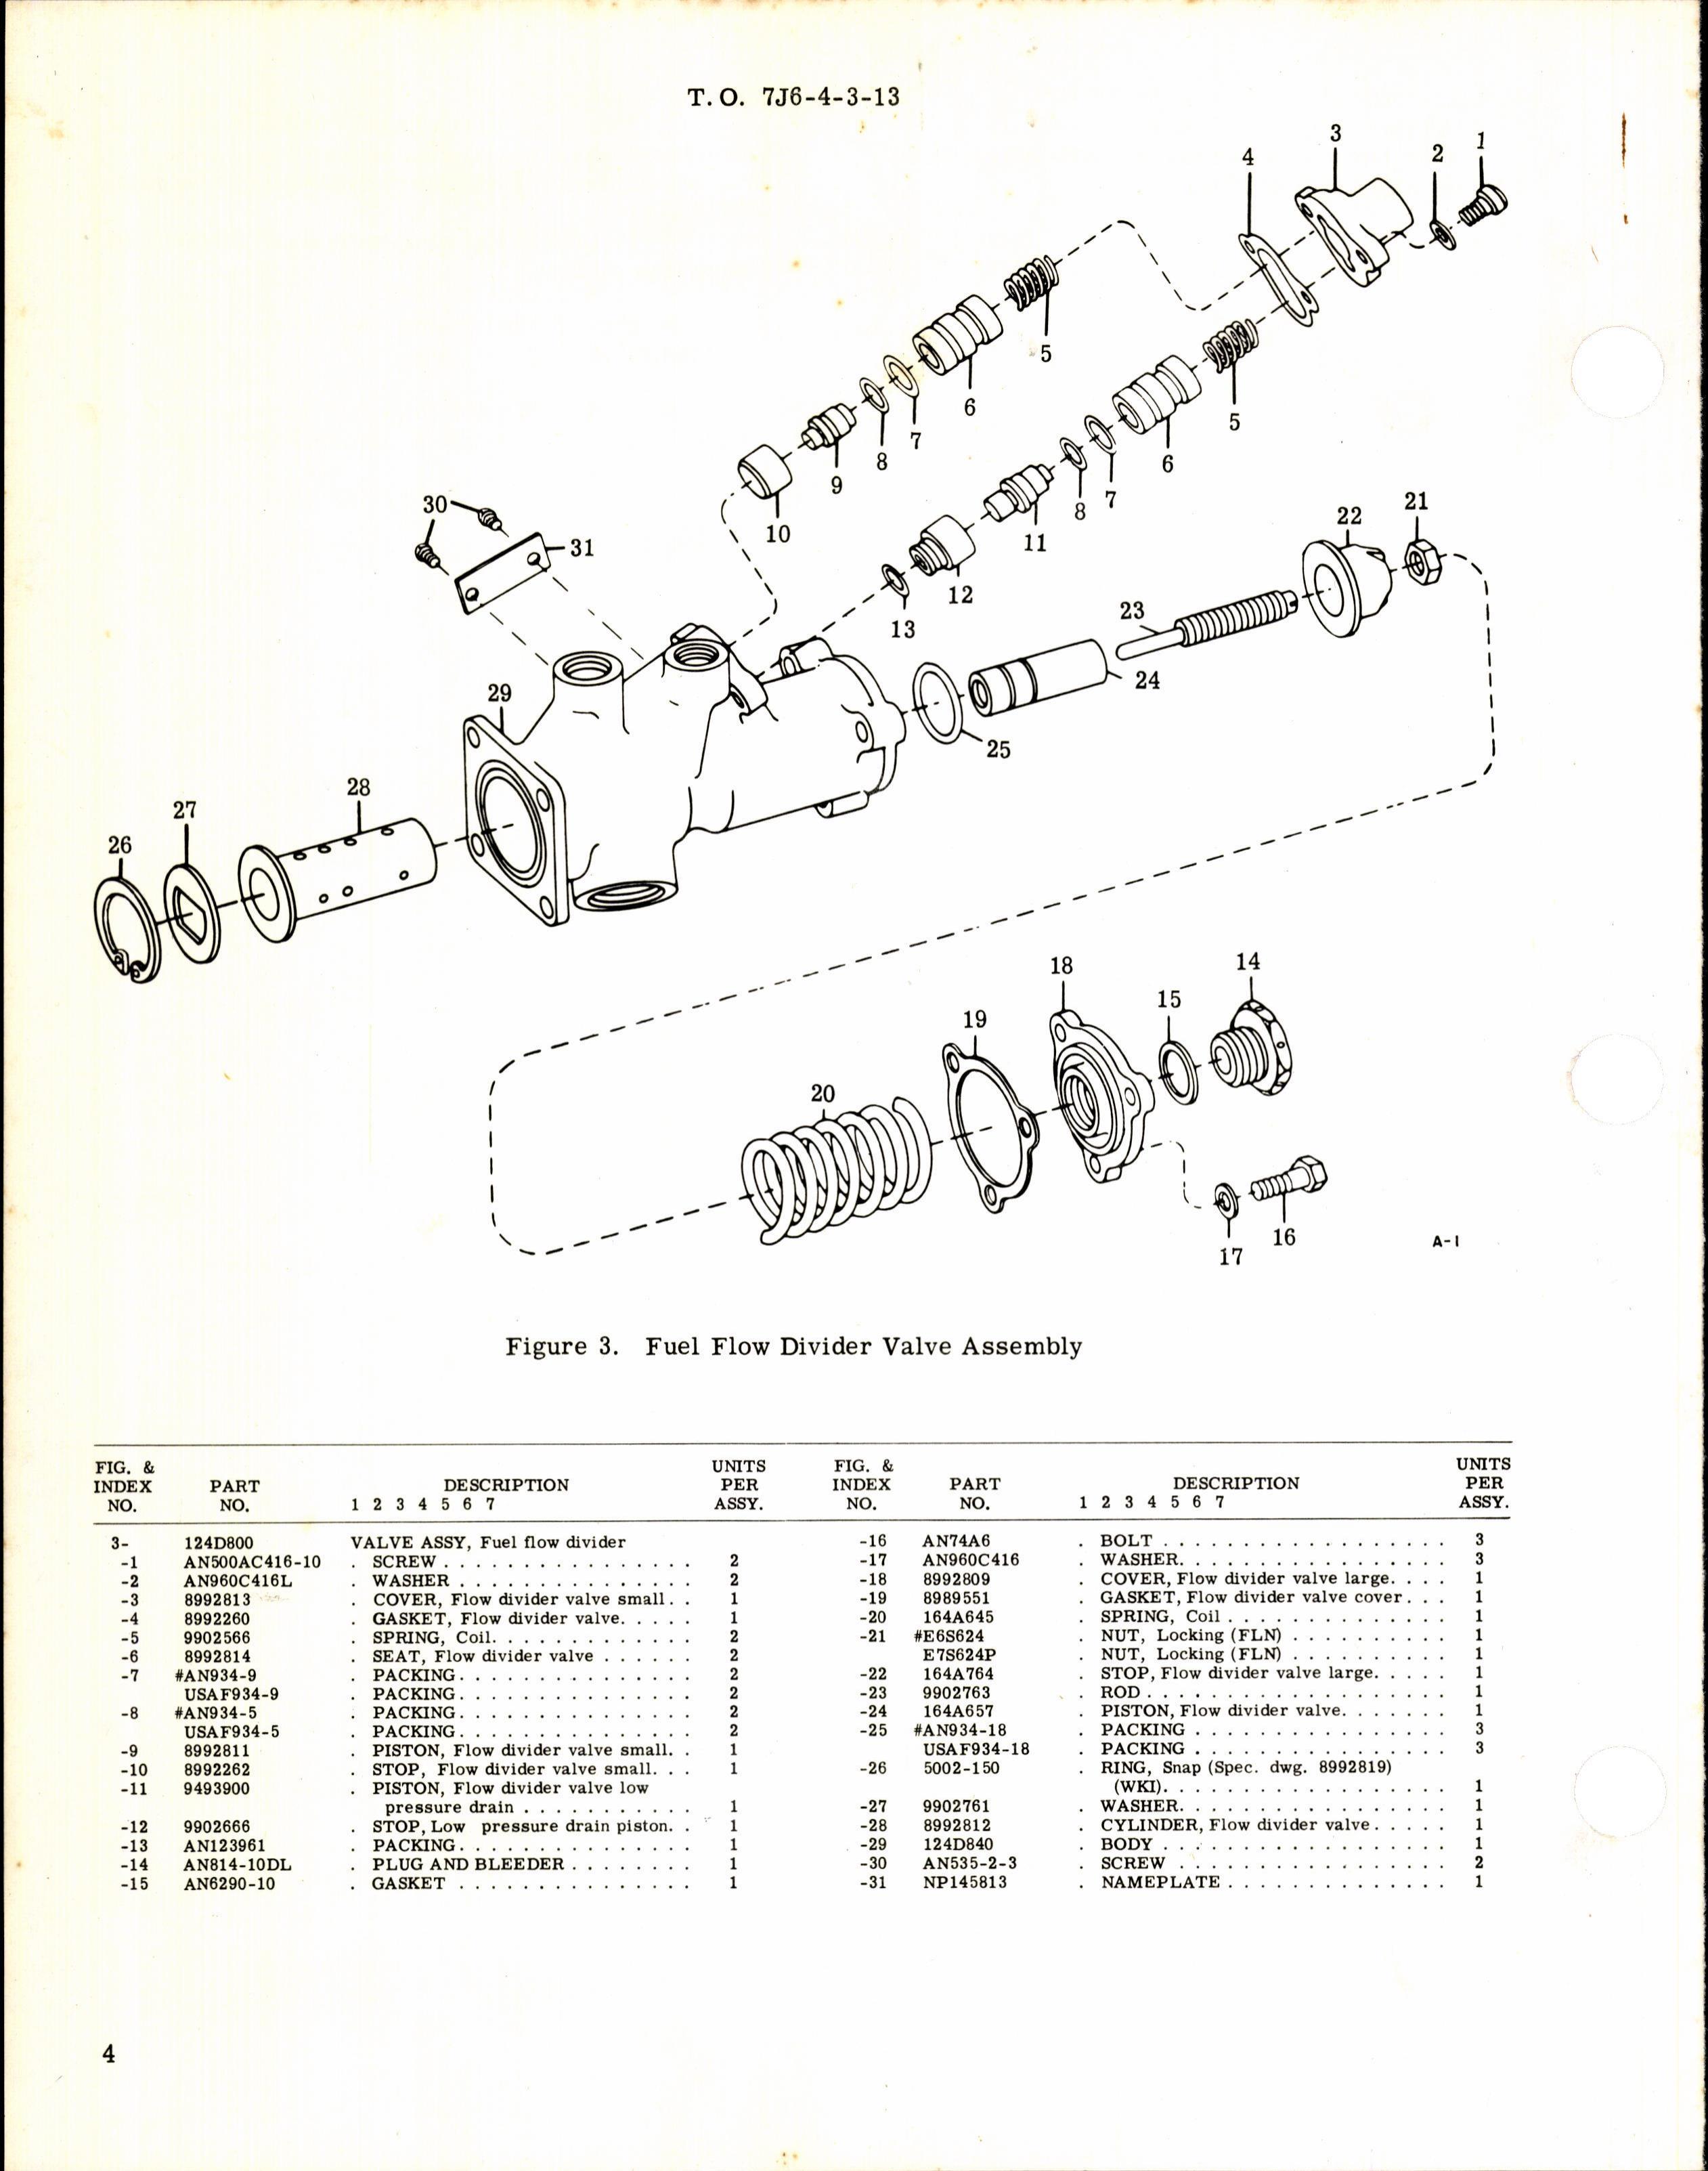 Sample page 4 from AirCorps Library document: Fuel Flow Divider Valve Assembly